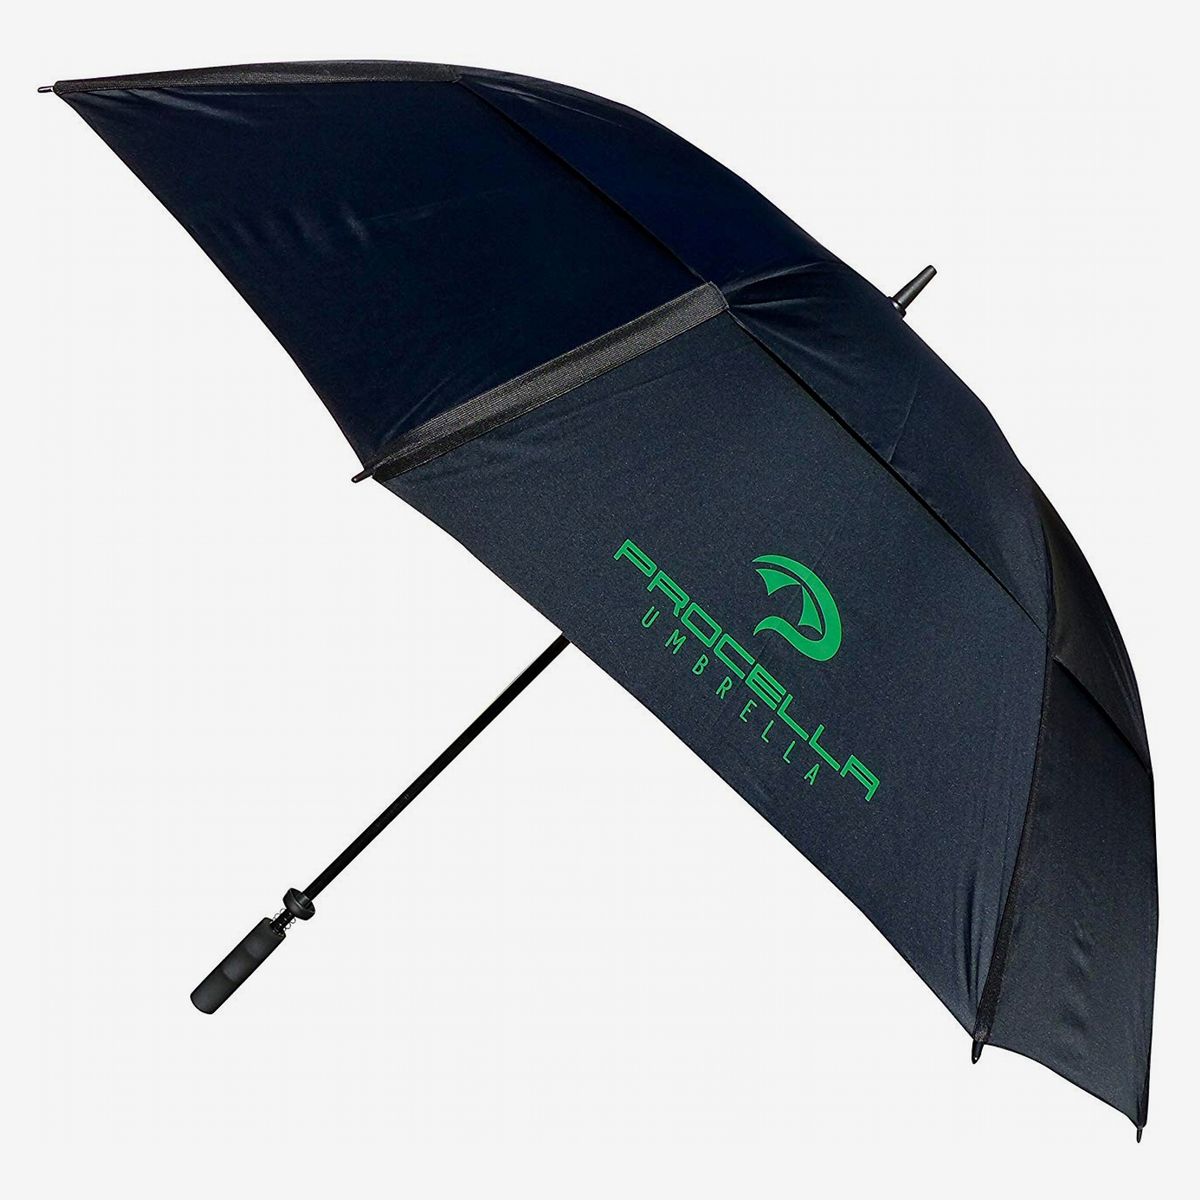 The 34 Best Umbrellas You Can Buy 2021 | The Strategist